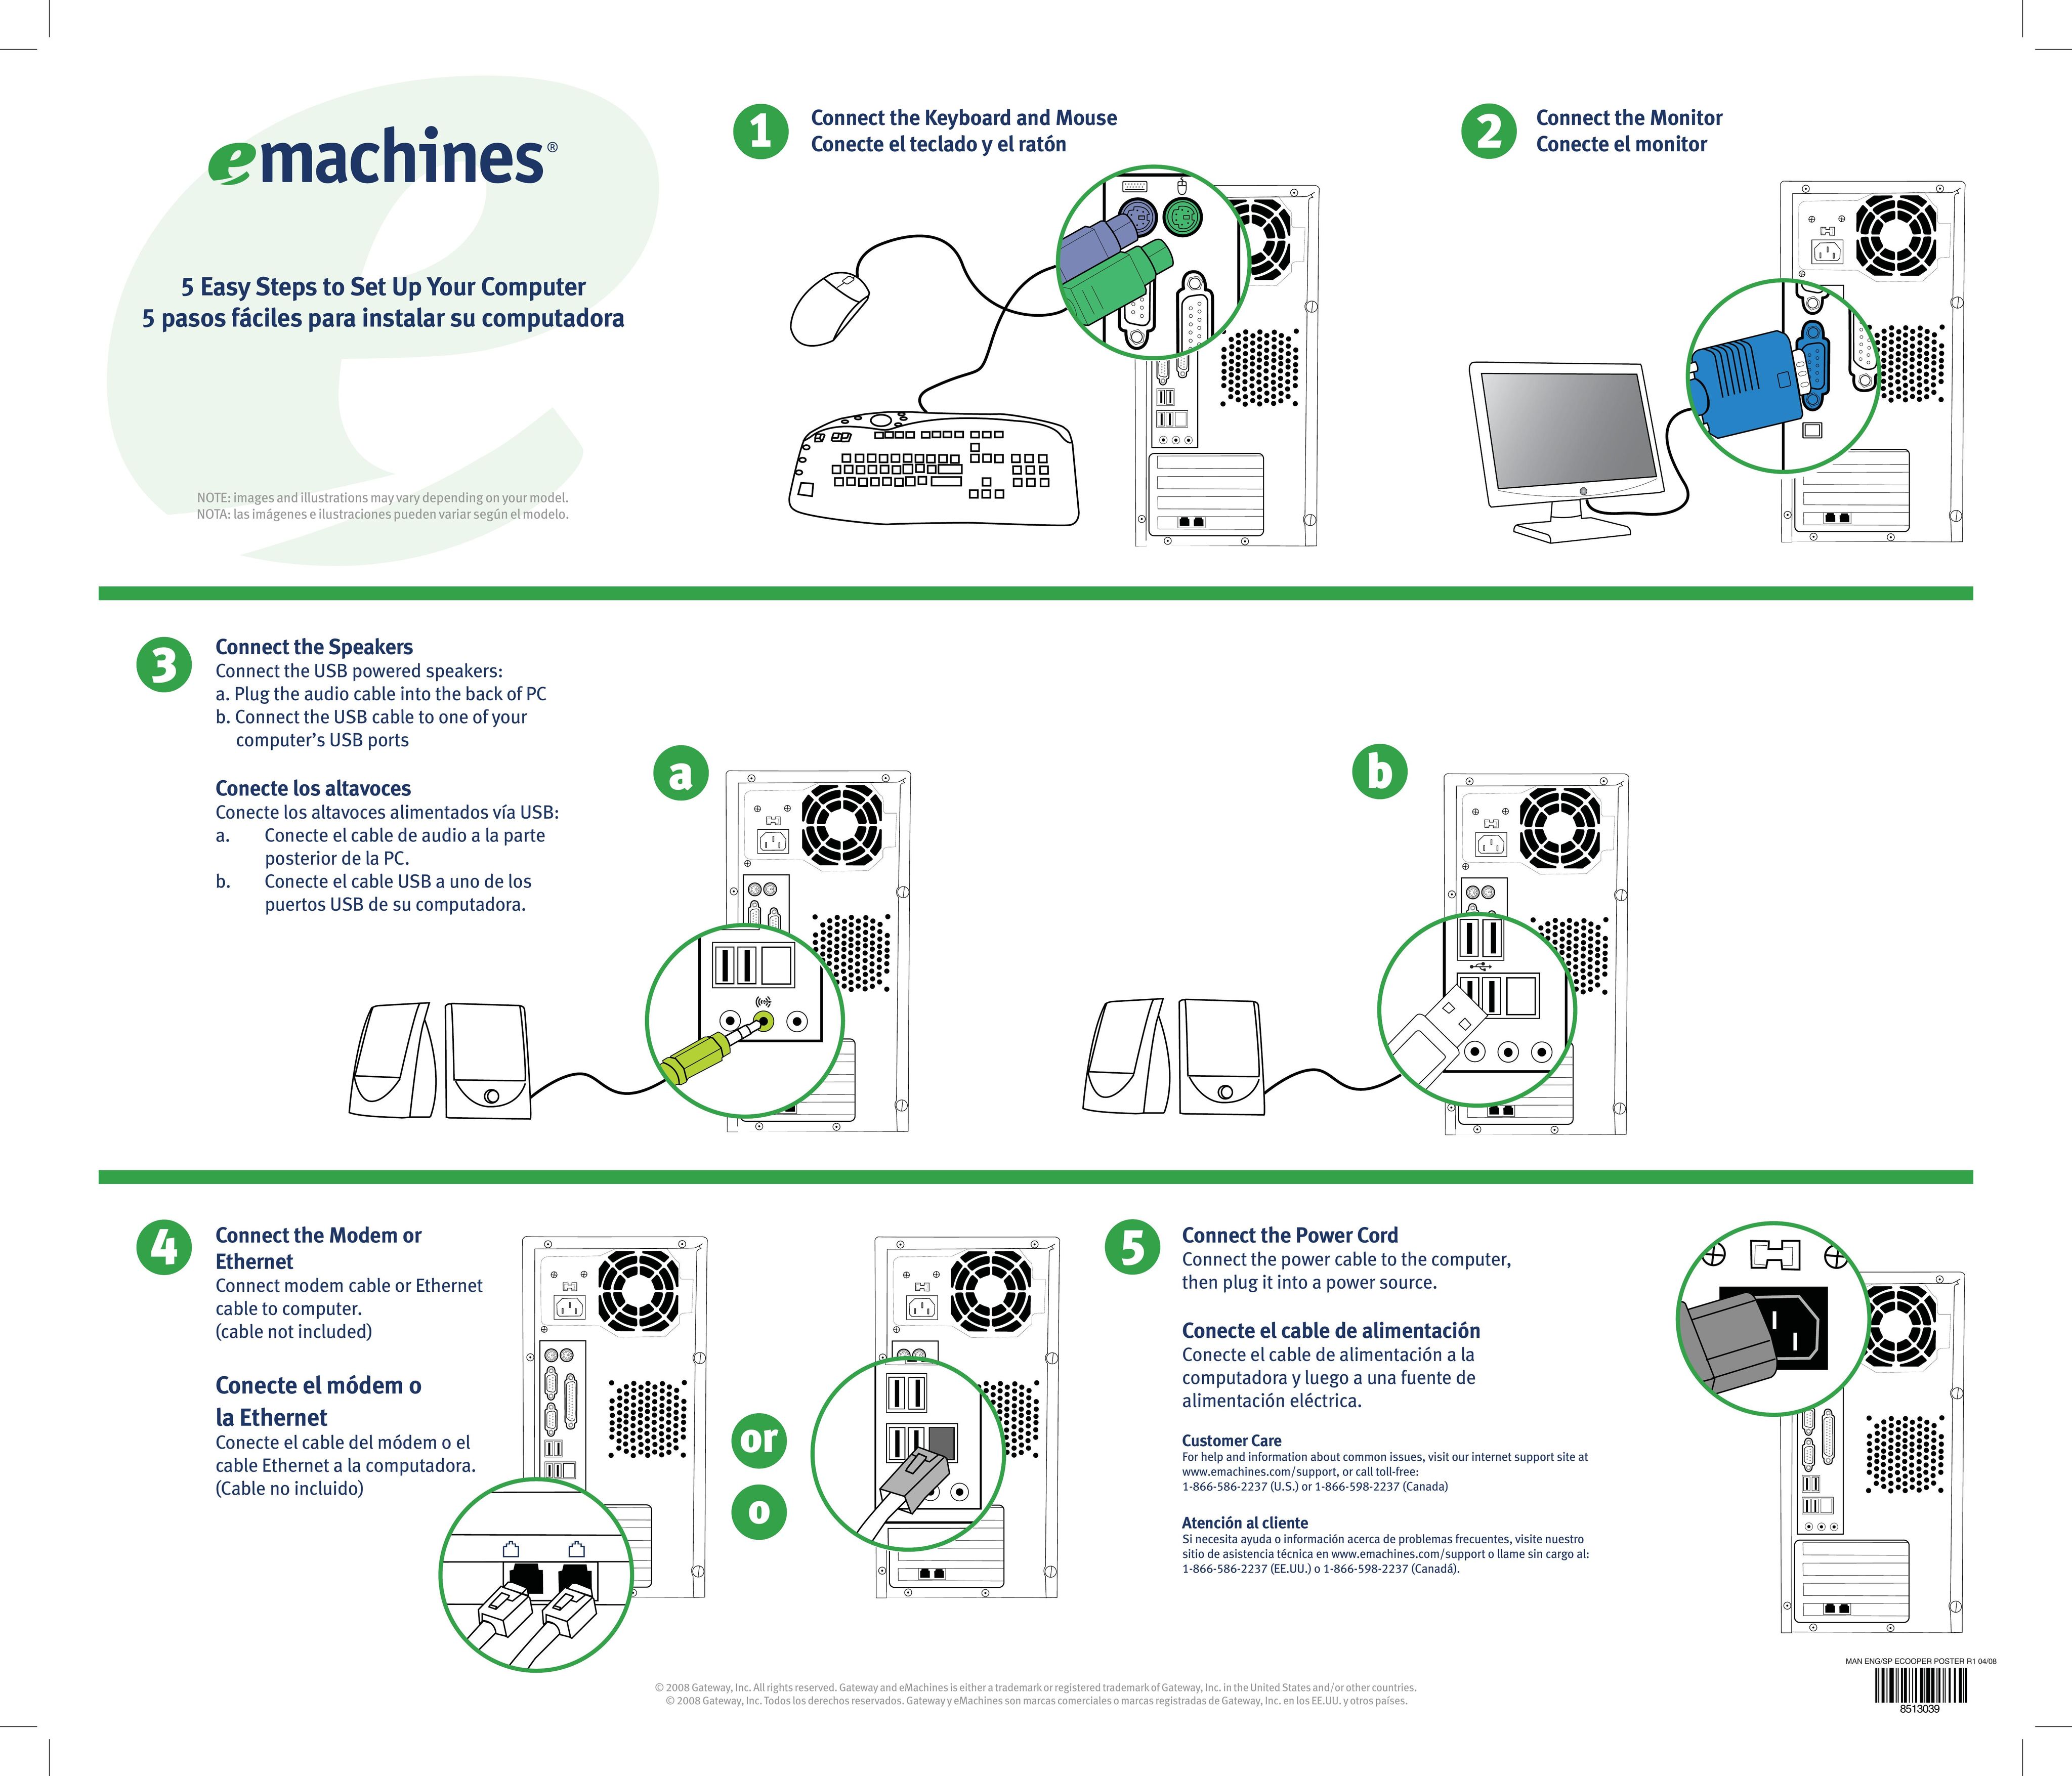 eMachines 8513039 Personal Computer User Manual